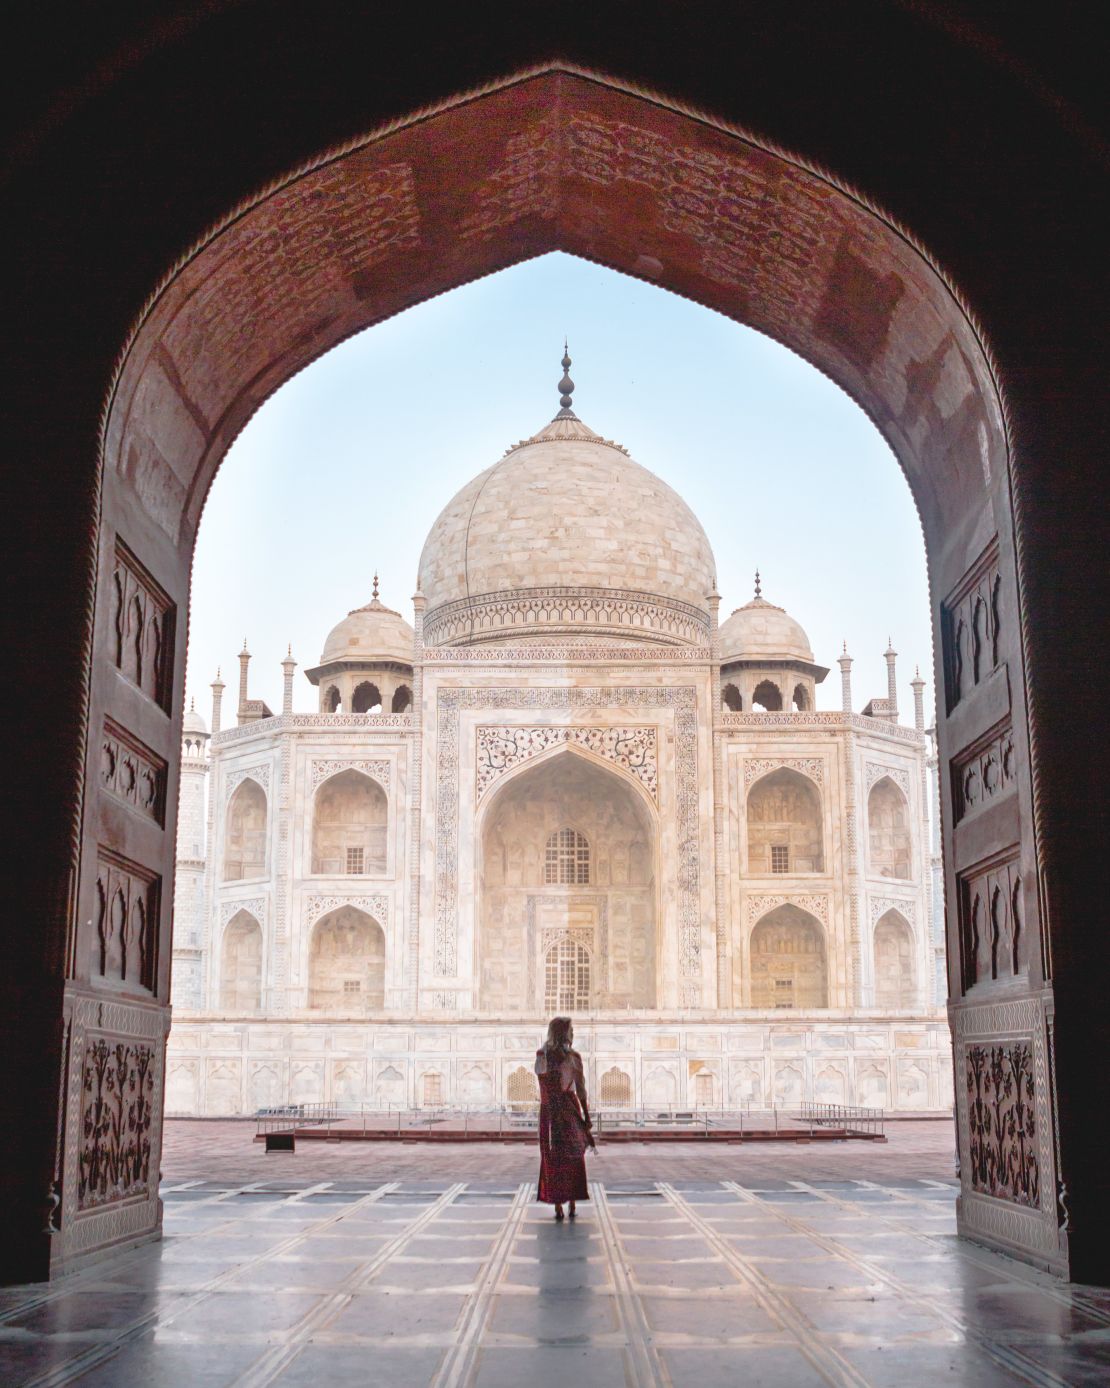 The Taj Mahal is India's most-visited attraction. 